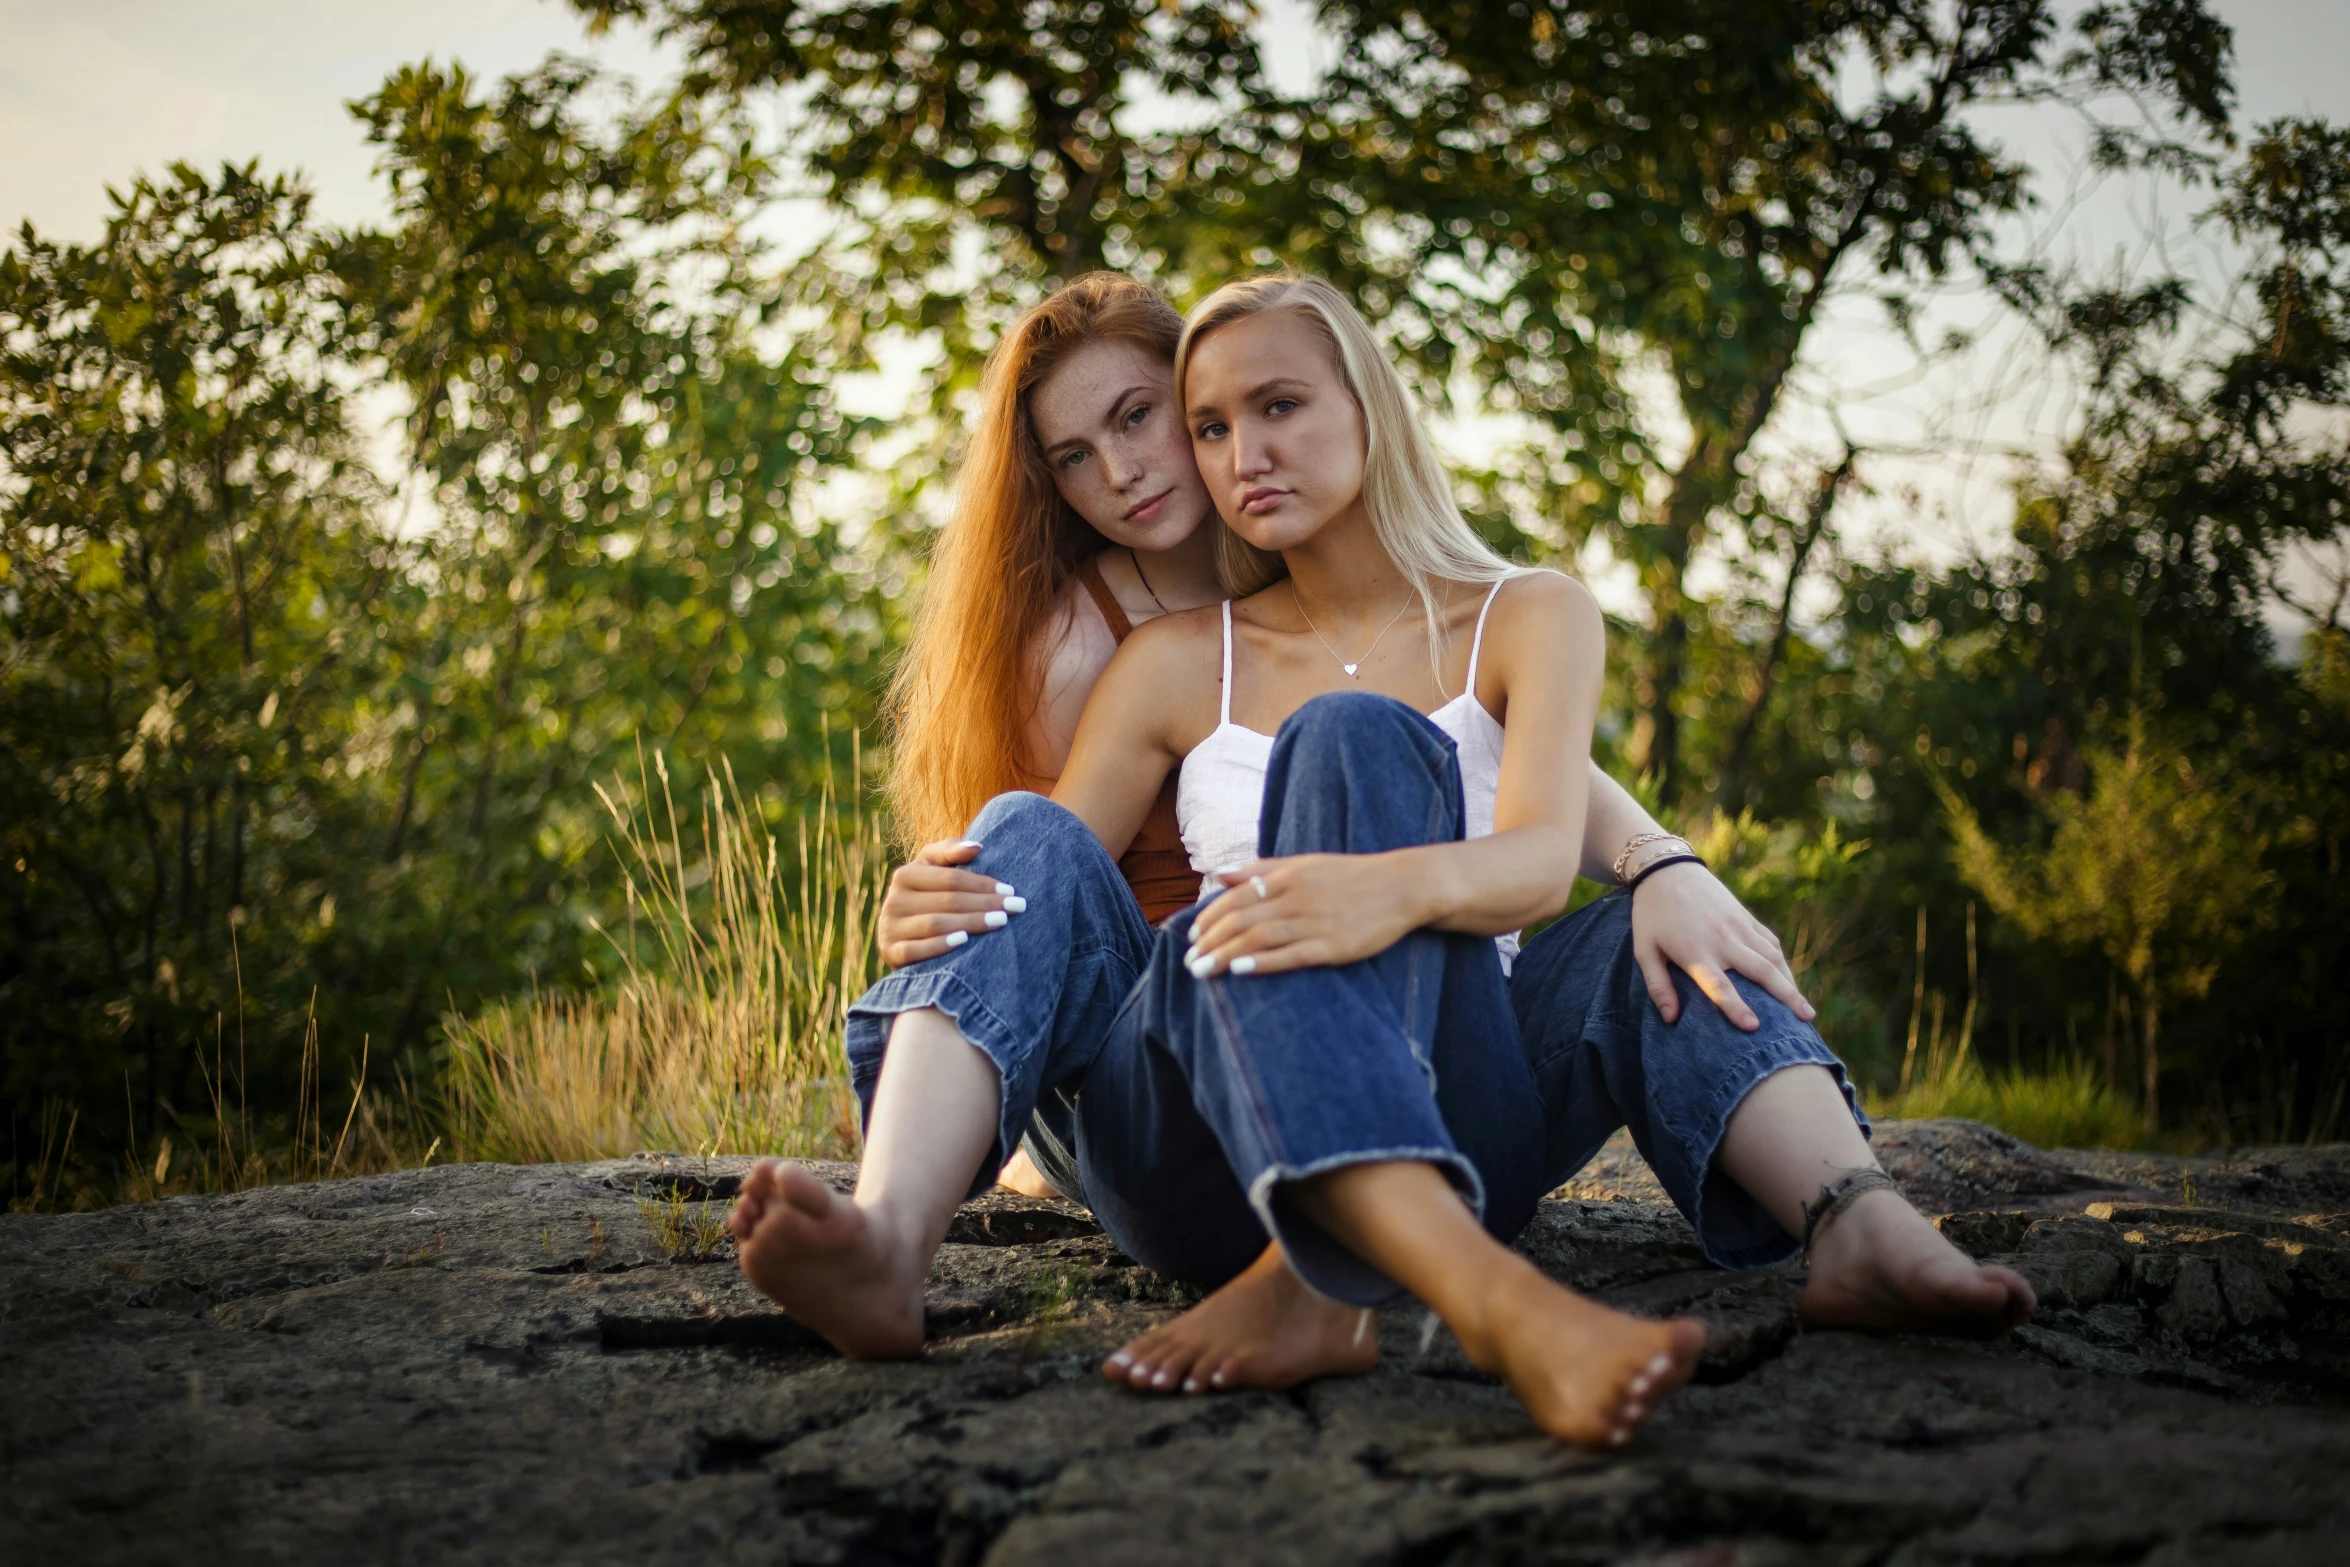 two women, each dressed in denims, sitting on rocks with trees in the background